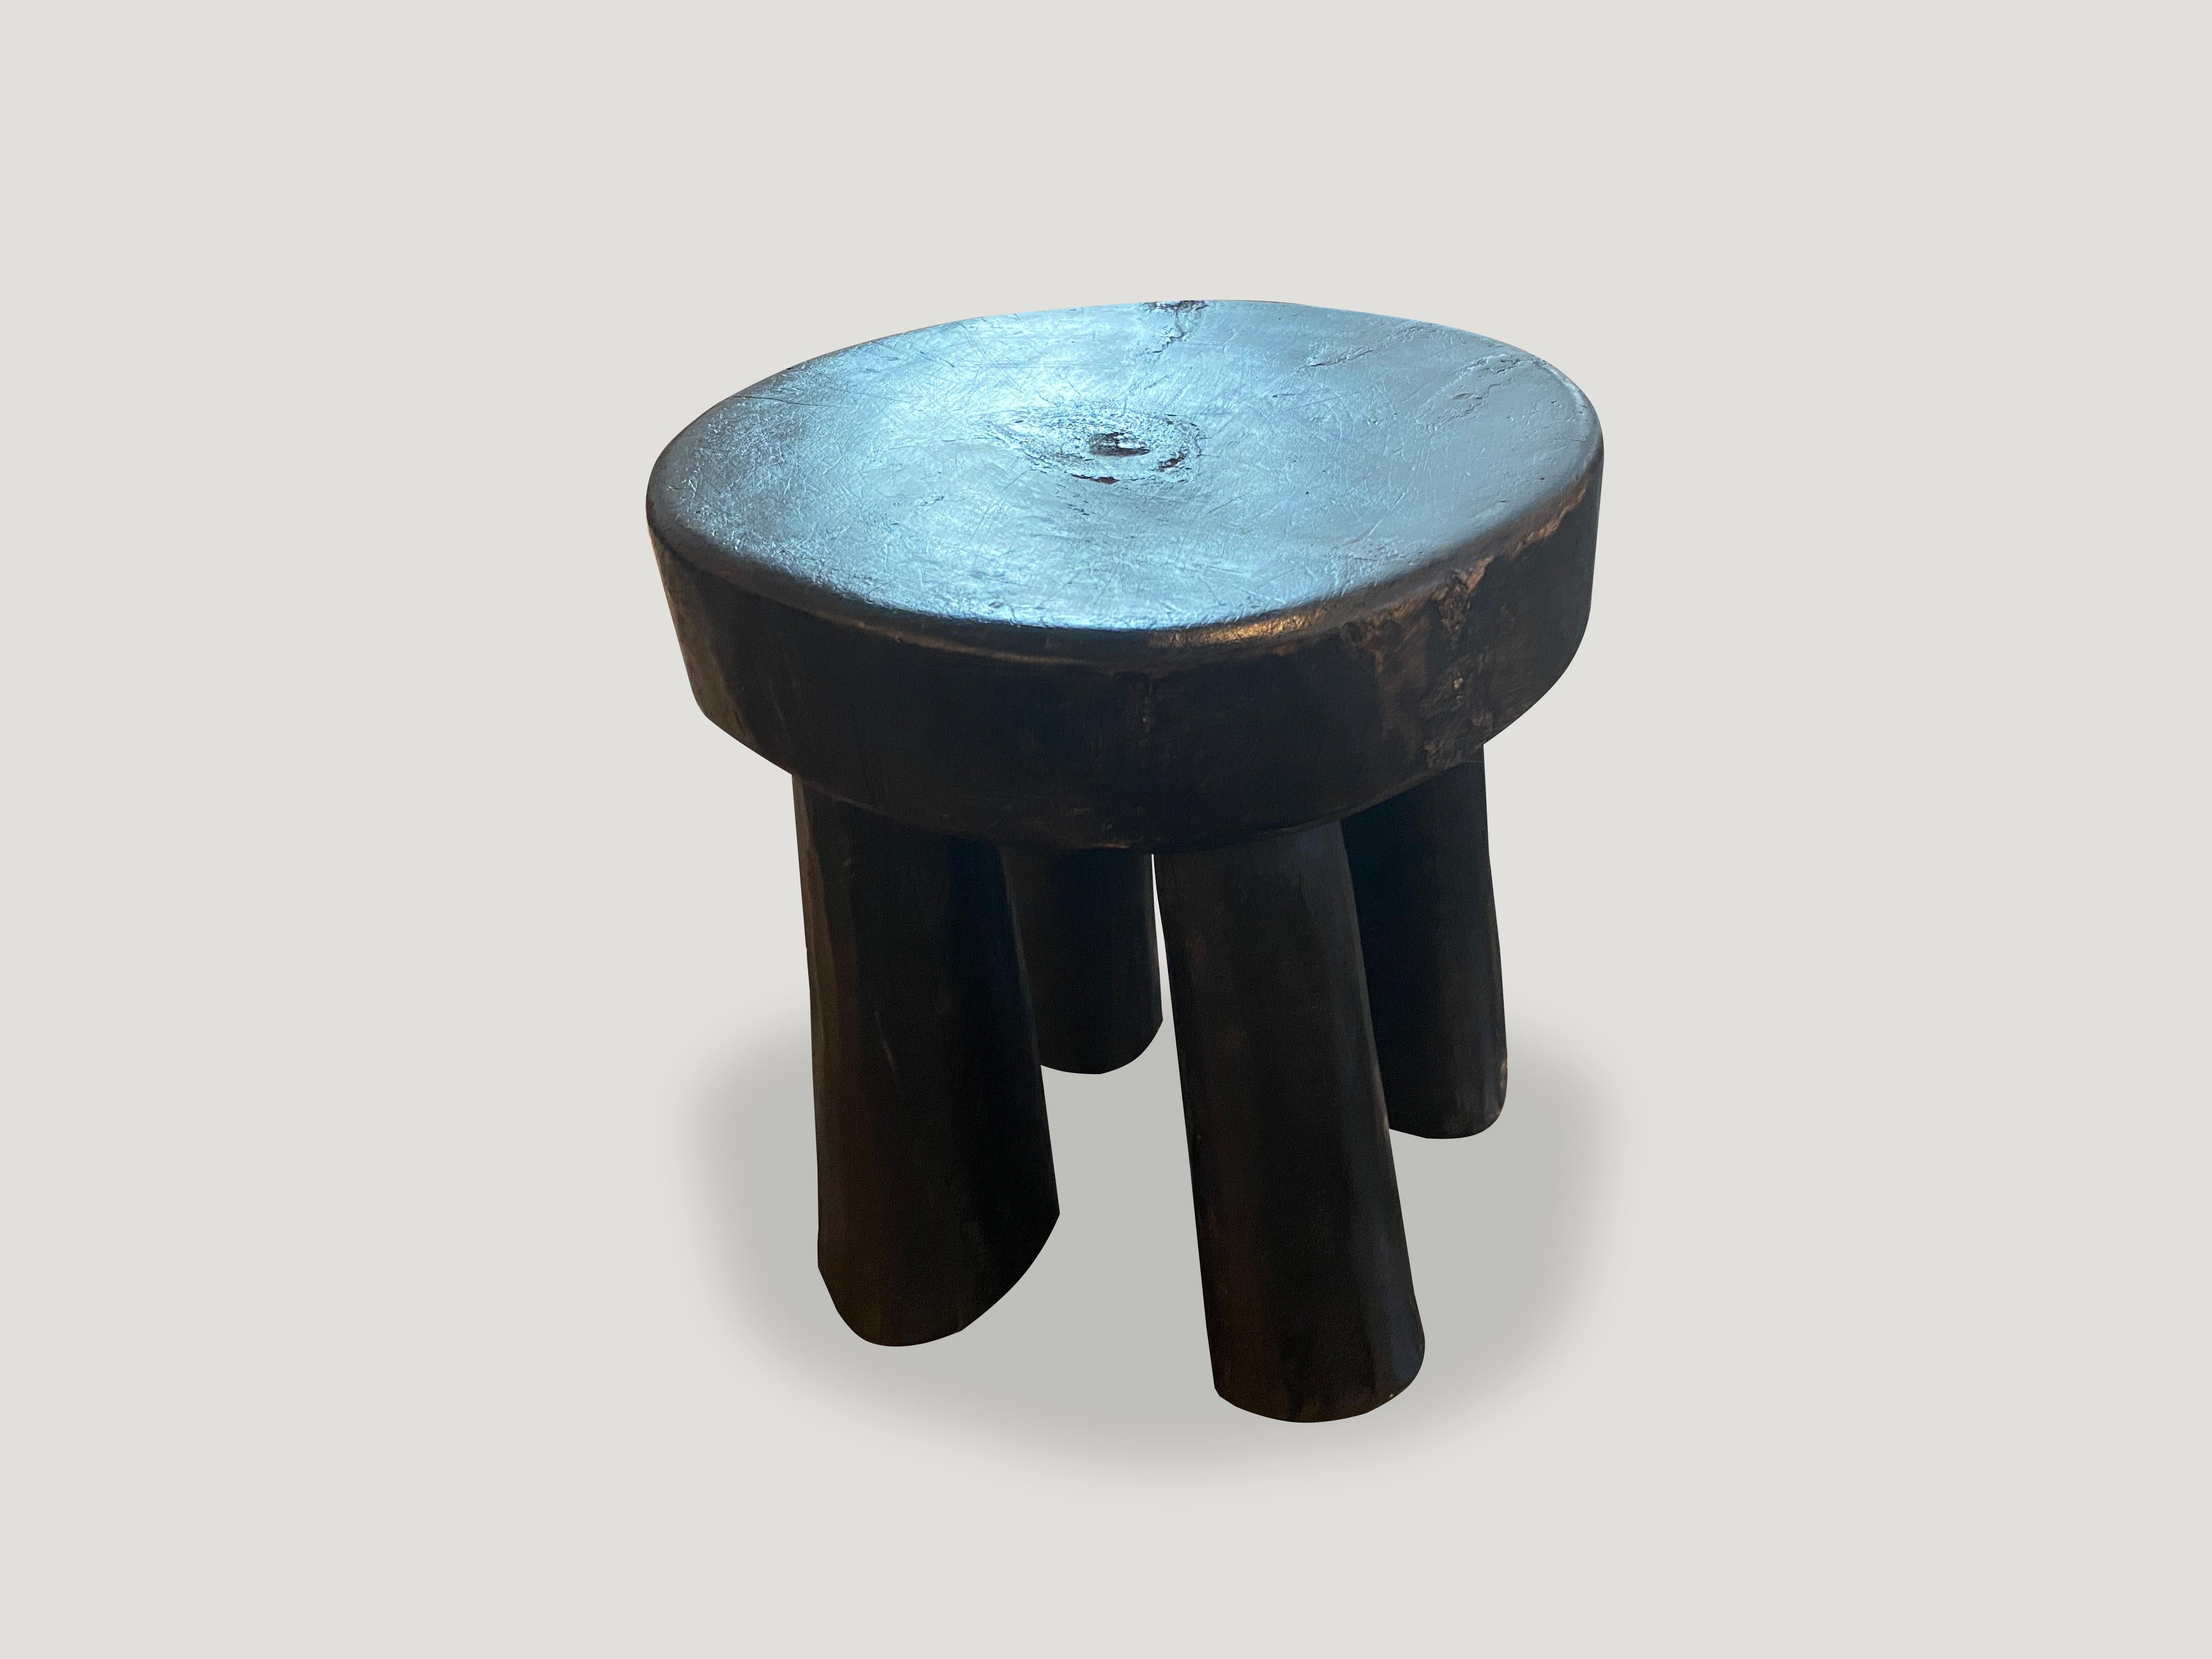 Tribal Andrianna Shamaris African Wood Side Table or Stool